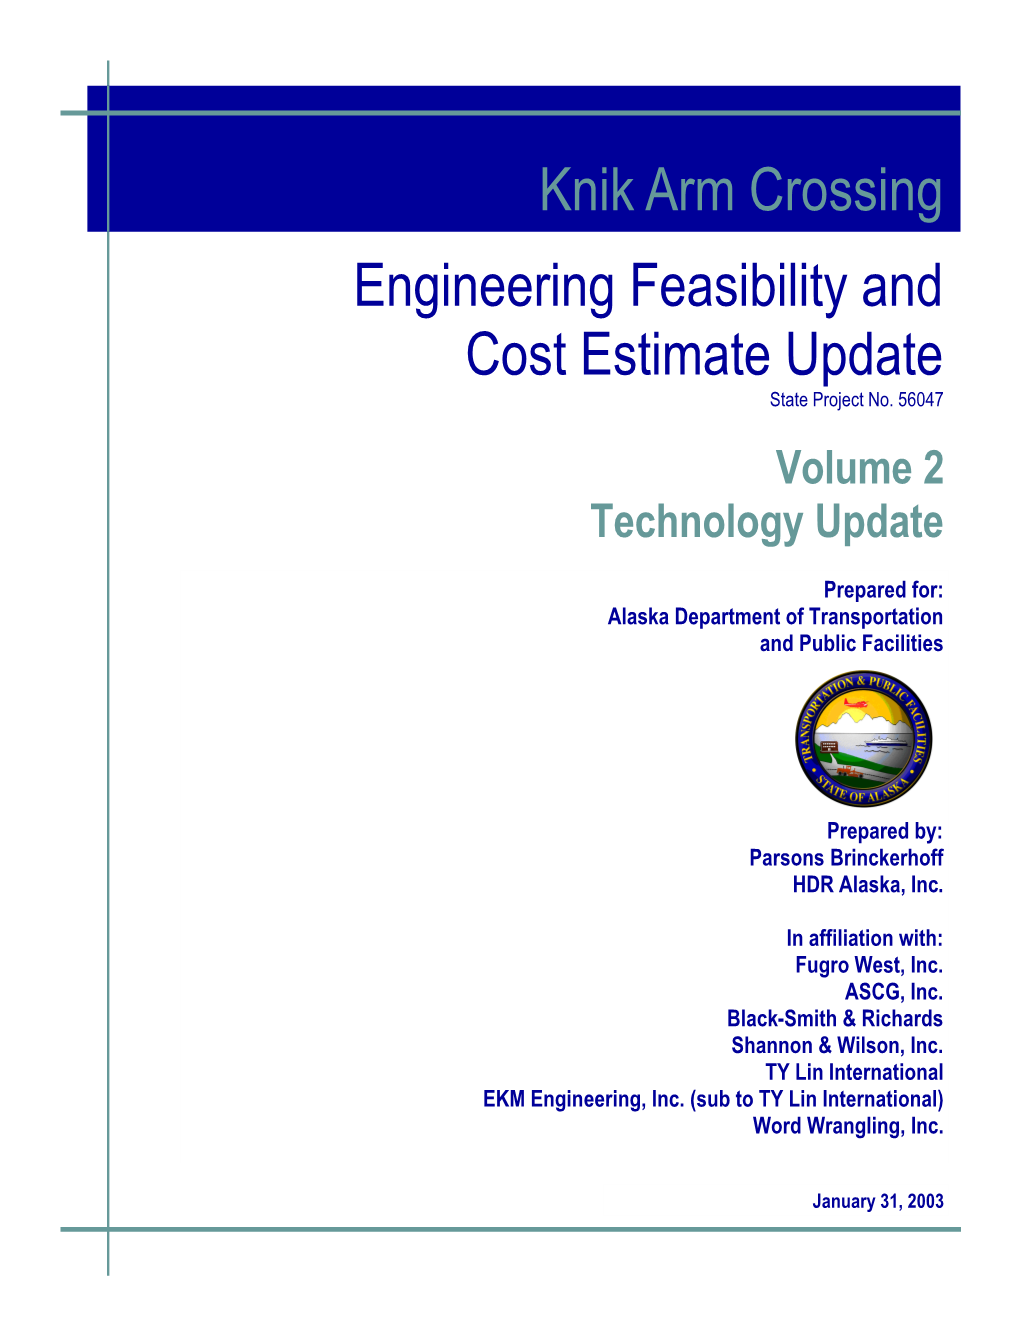 Knik Arm Crossing Engineering Feasibility and Cost Estimate Update